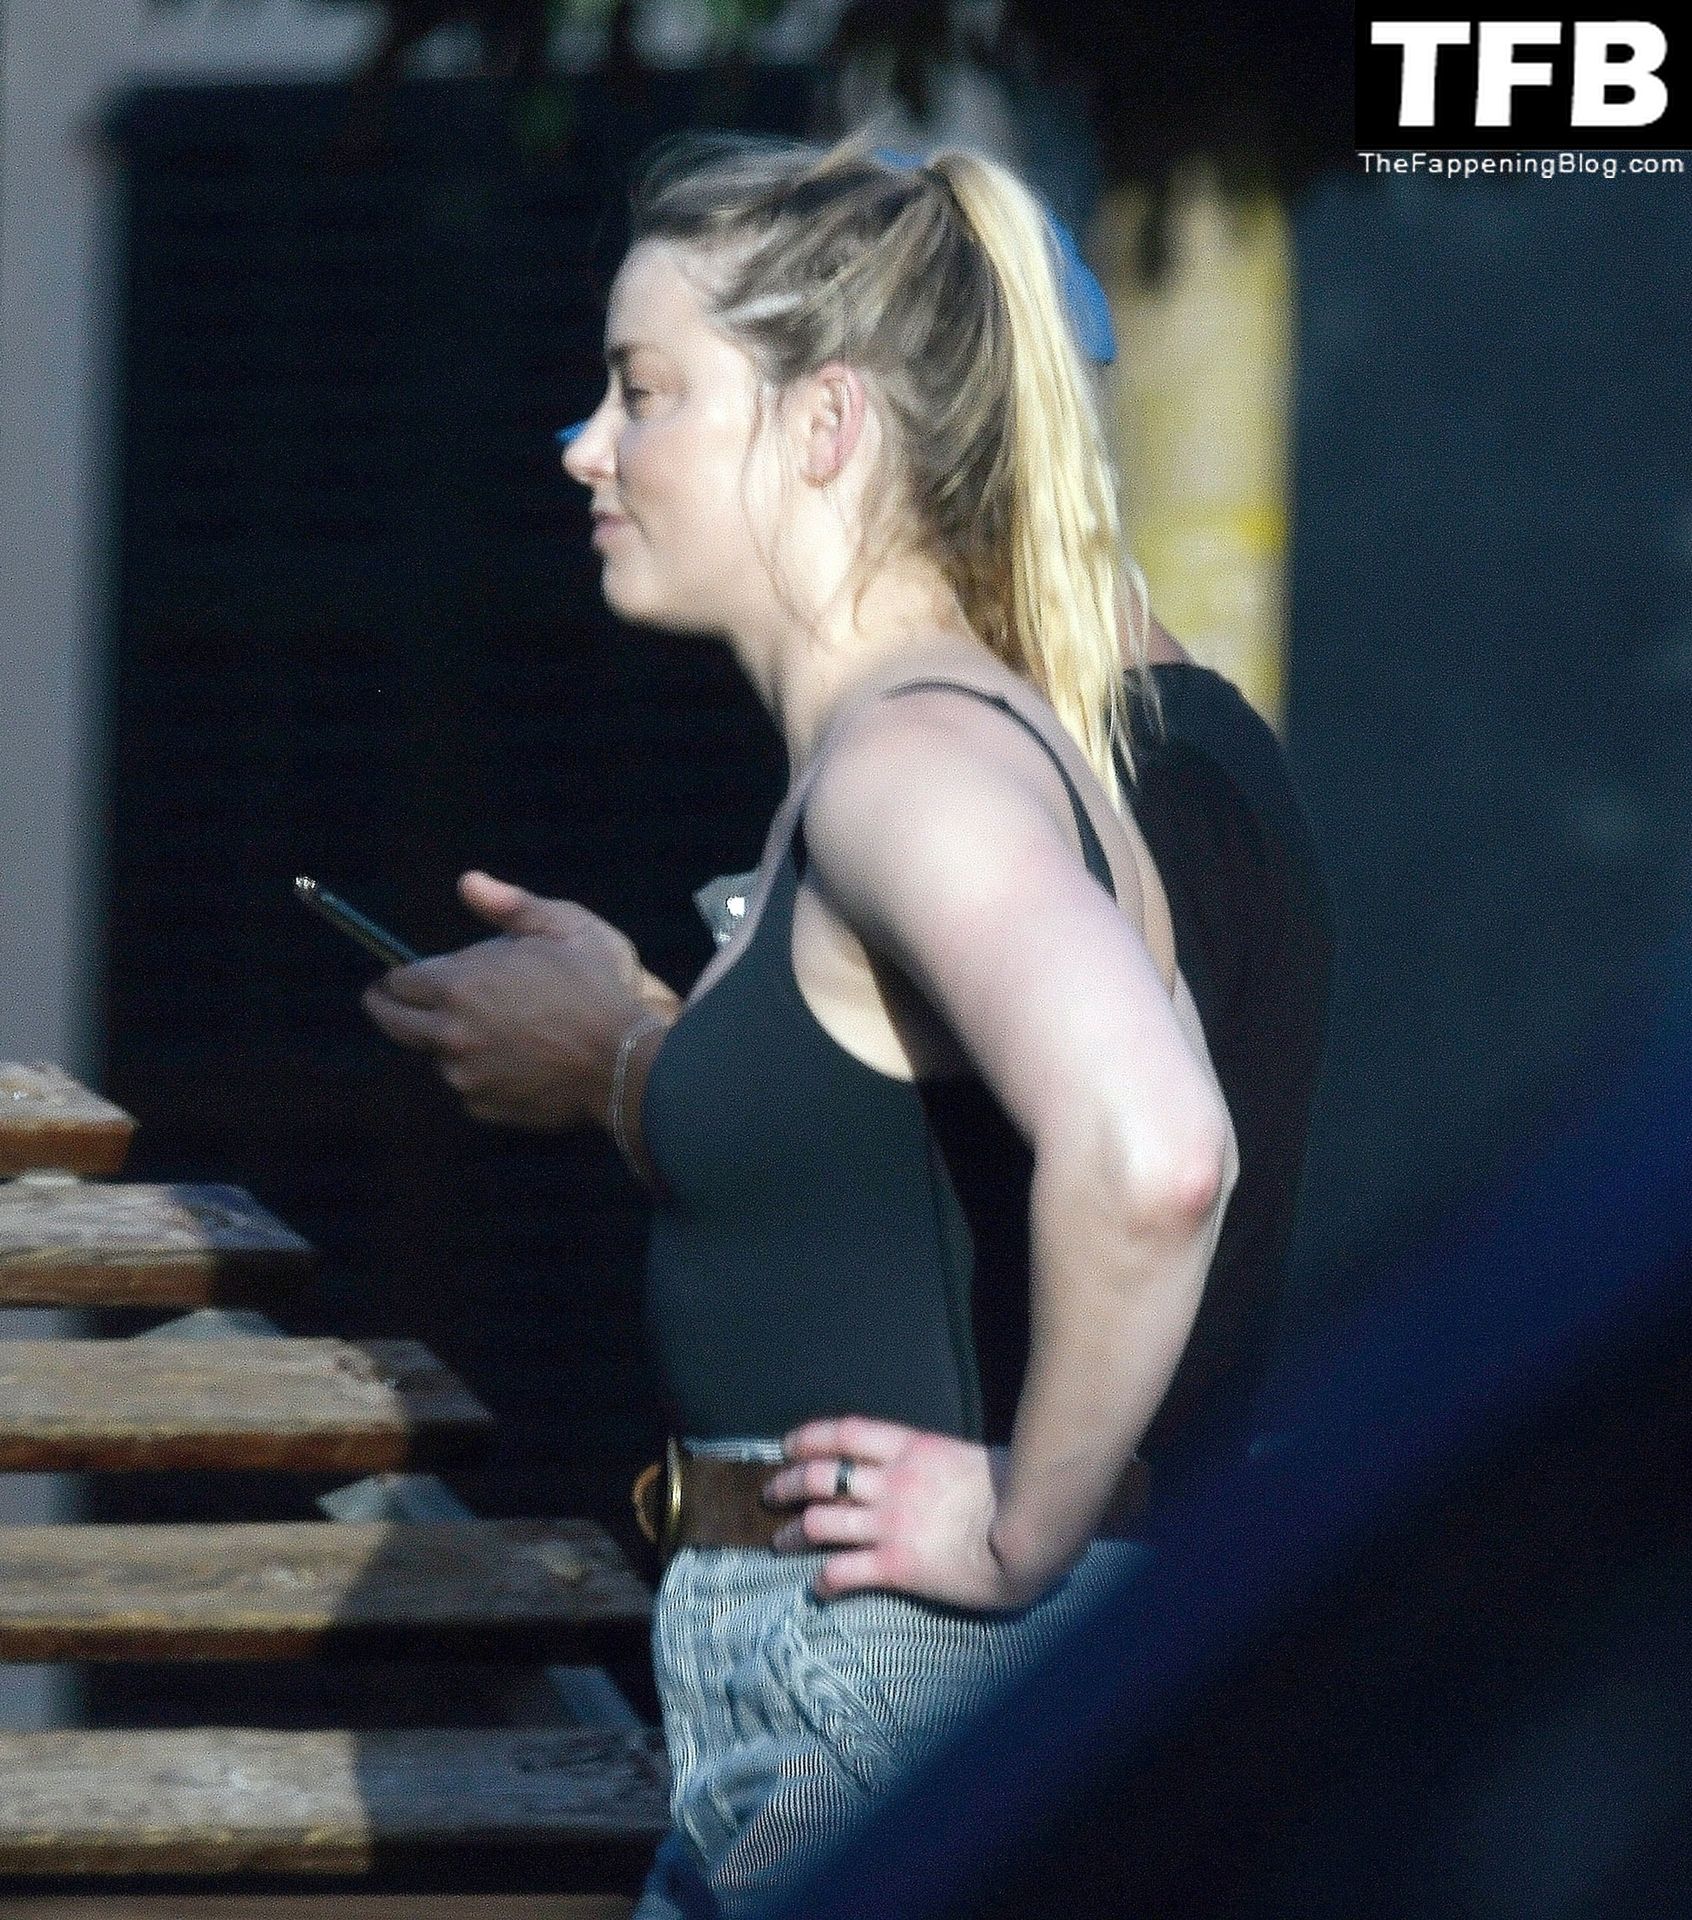 Amber Heard Sexy The Fappening Blog 11 - Amber Heard Continues to Get Away From It All During her Spanish Vacation in Palma De Mallorca (26 Photos)